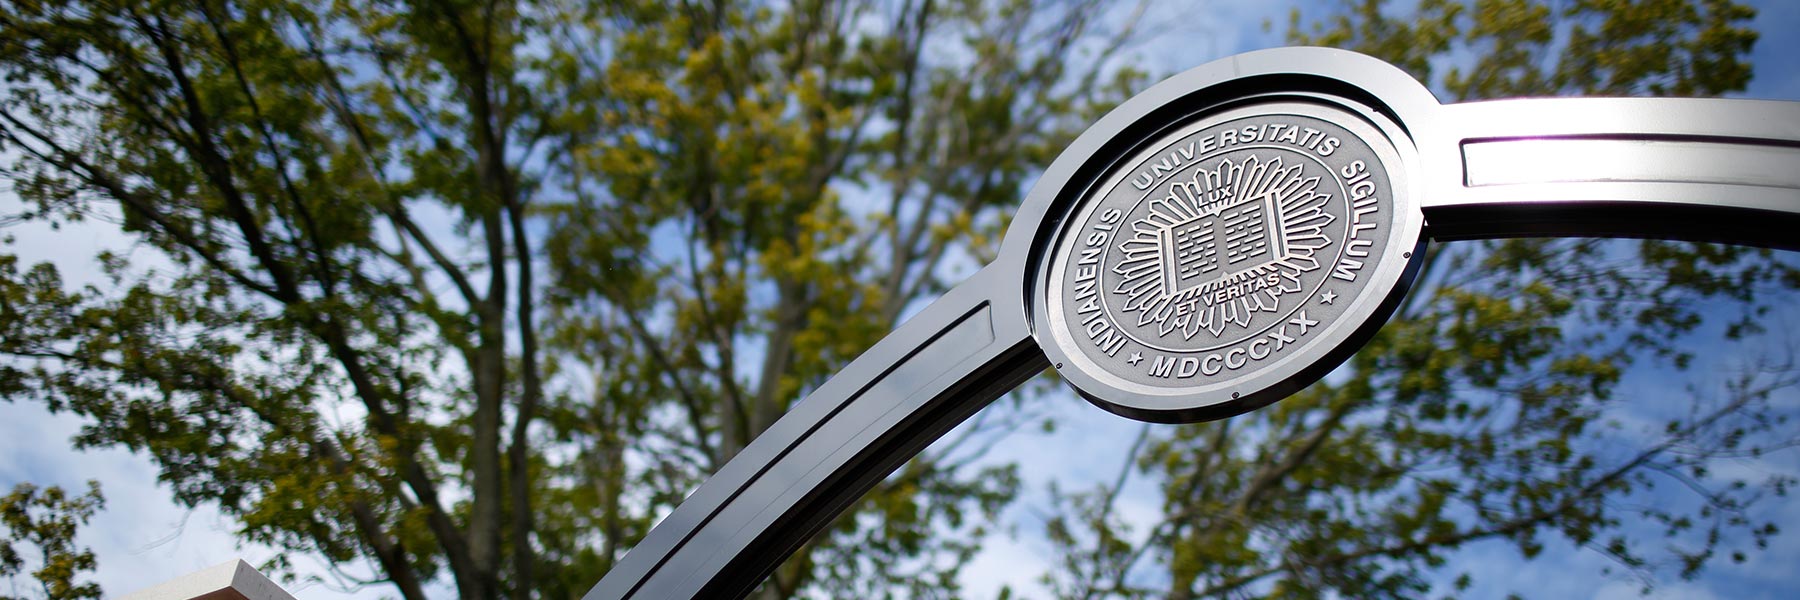 Indiana University seal on a metal arch in front of a blue sky